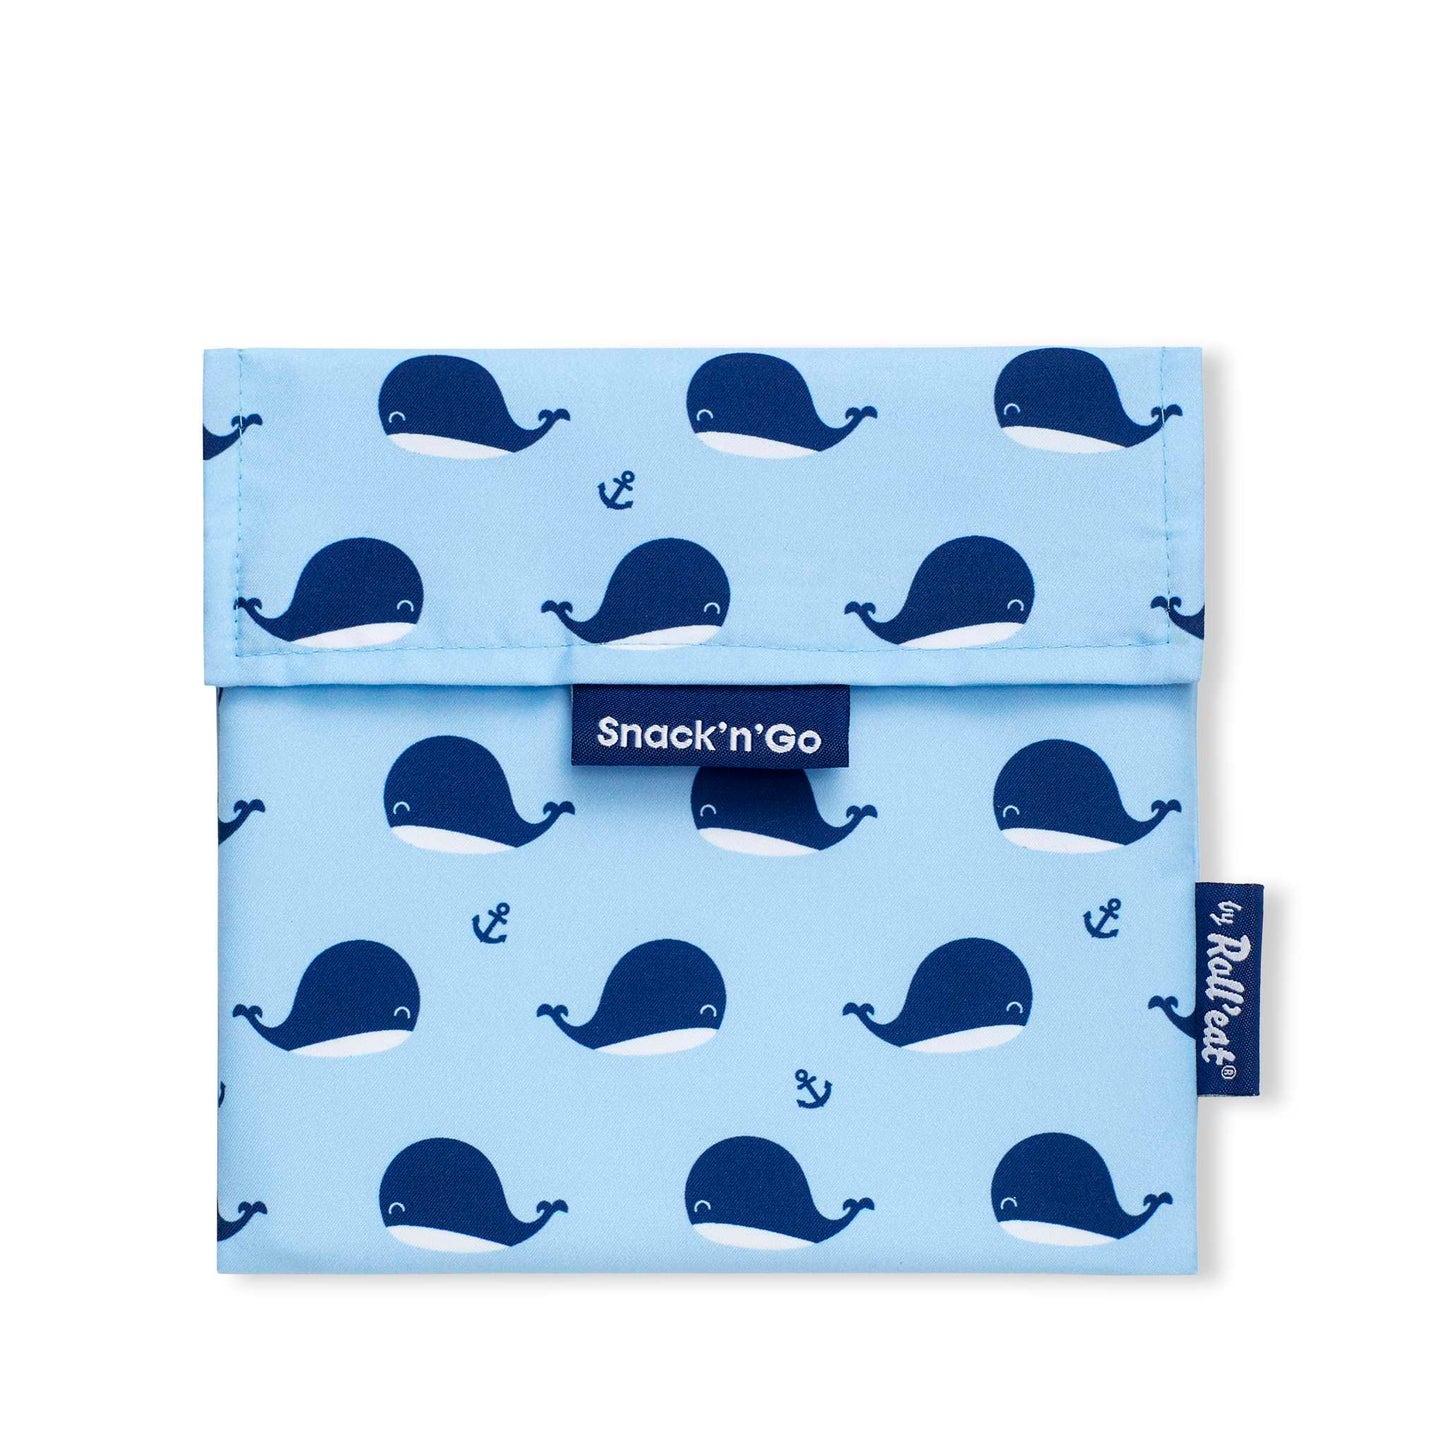 Roll N Eat Lunchboxes Snack'n'Go - Reusable Snack Bag - Whales